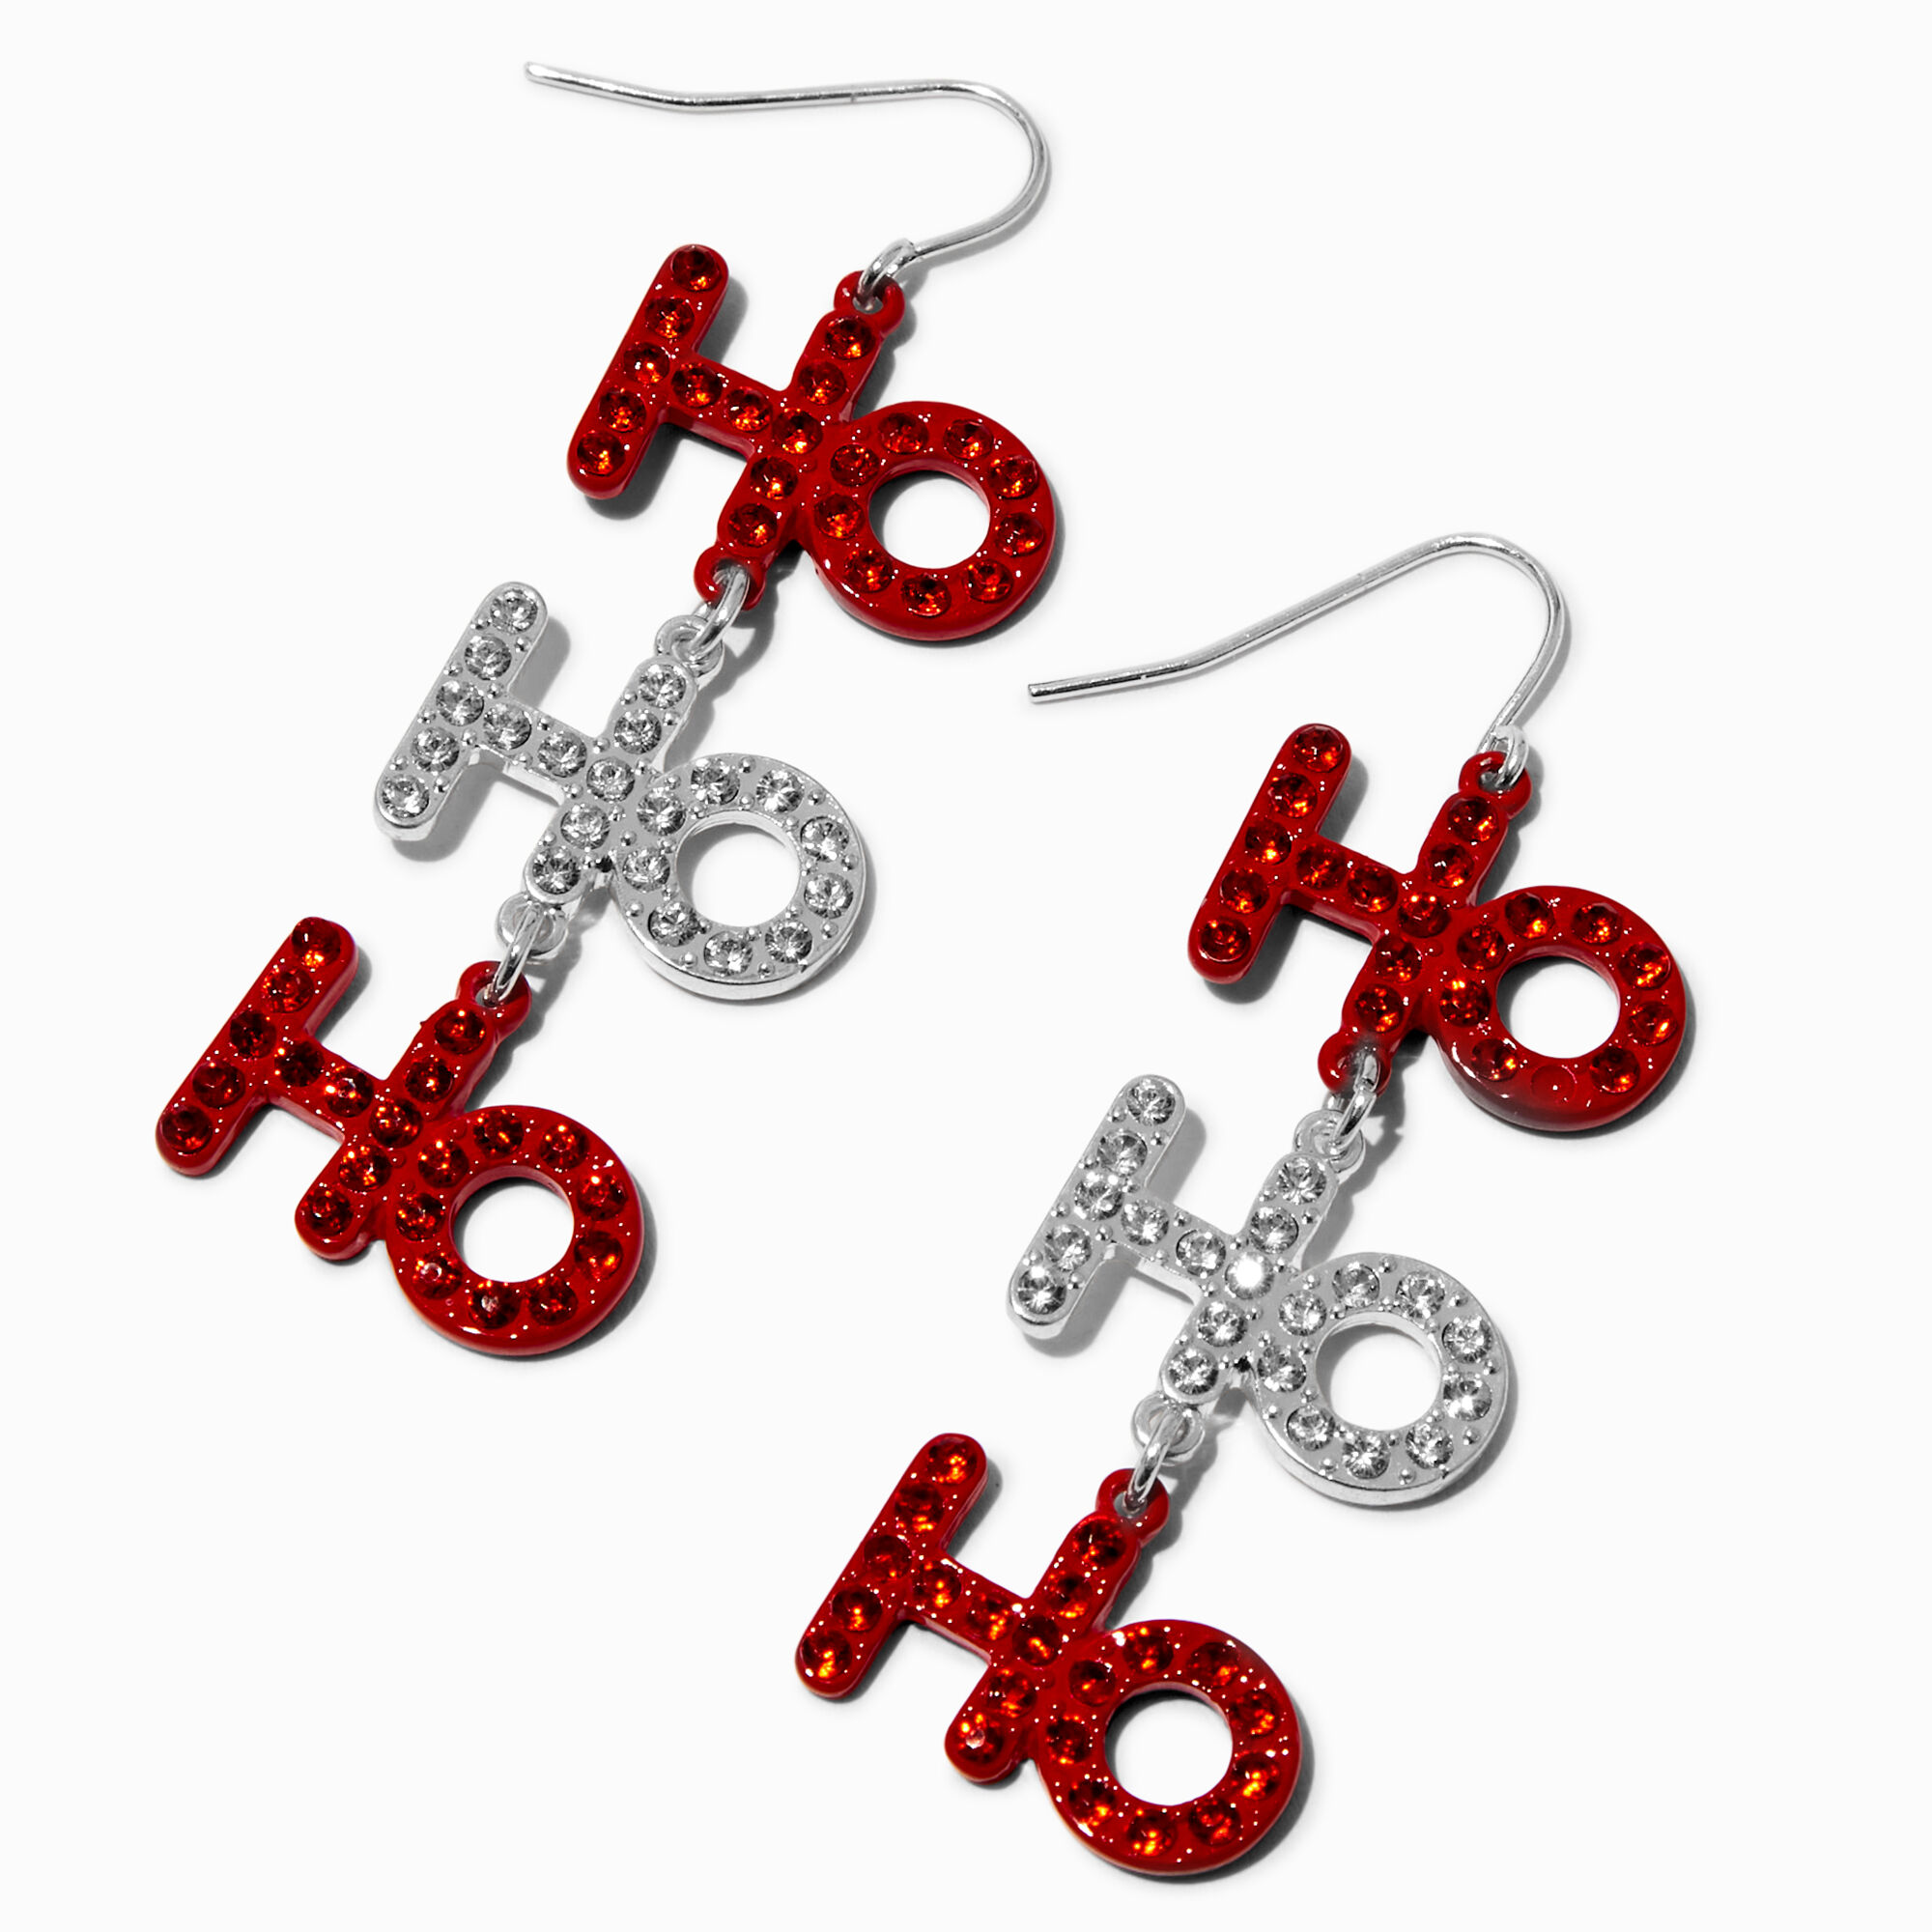 View Claires Crystal ho Ho Ho 2 Drop Earrings information